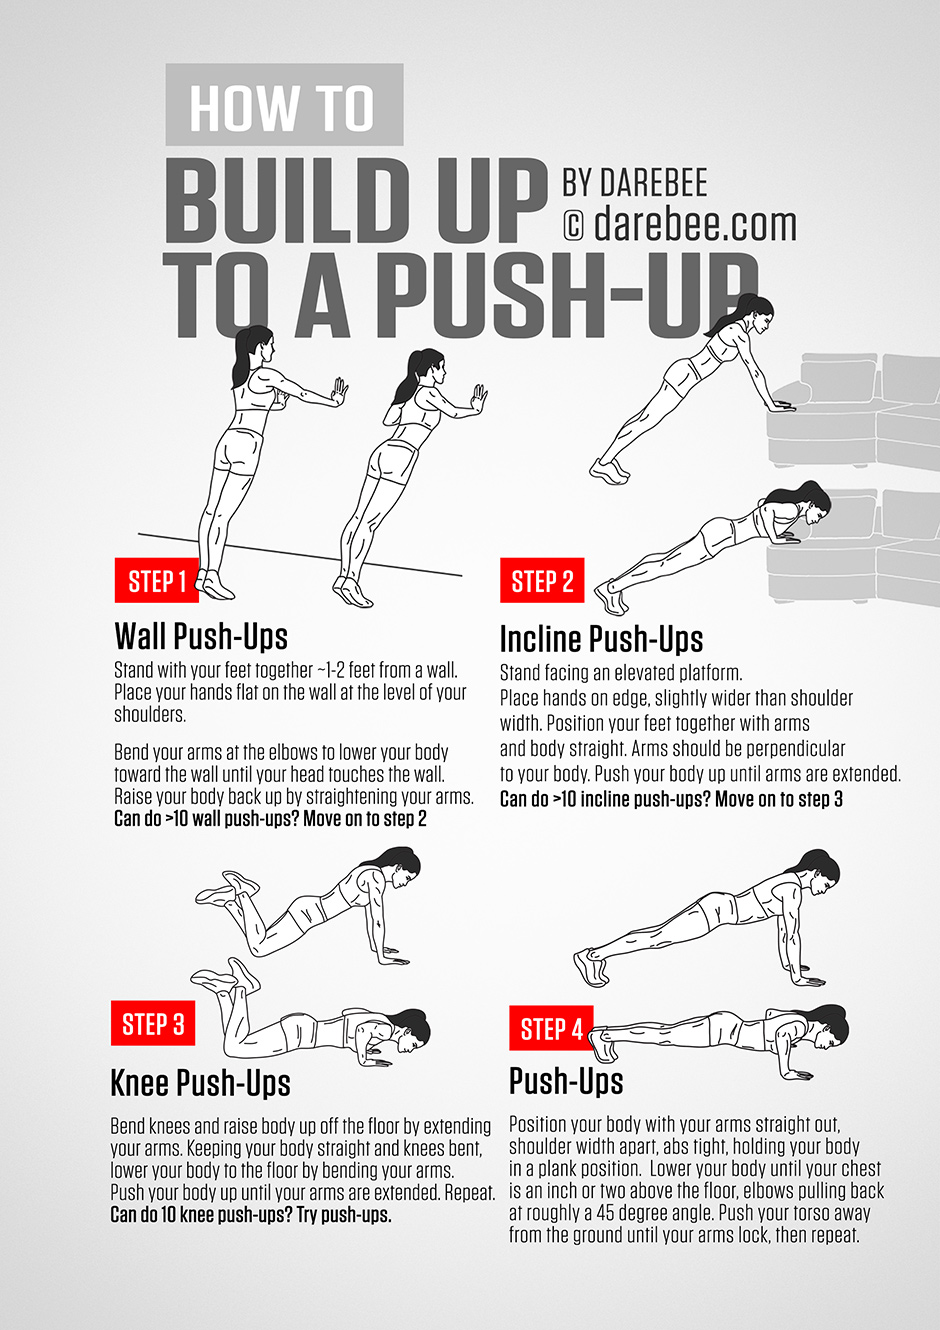 Push-Ups Guide - How to Build Up to a Push-Up